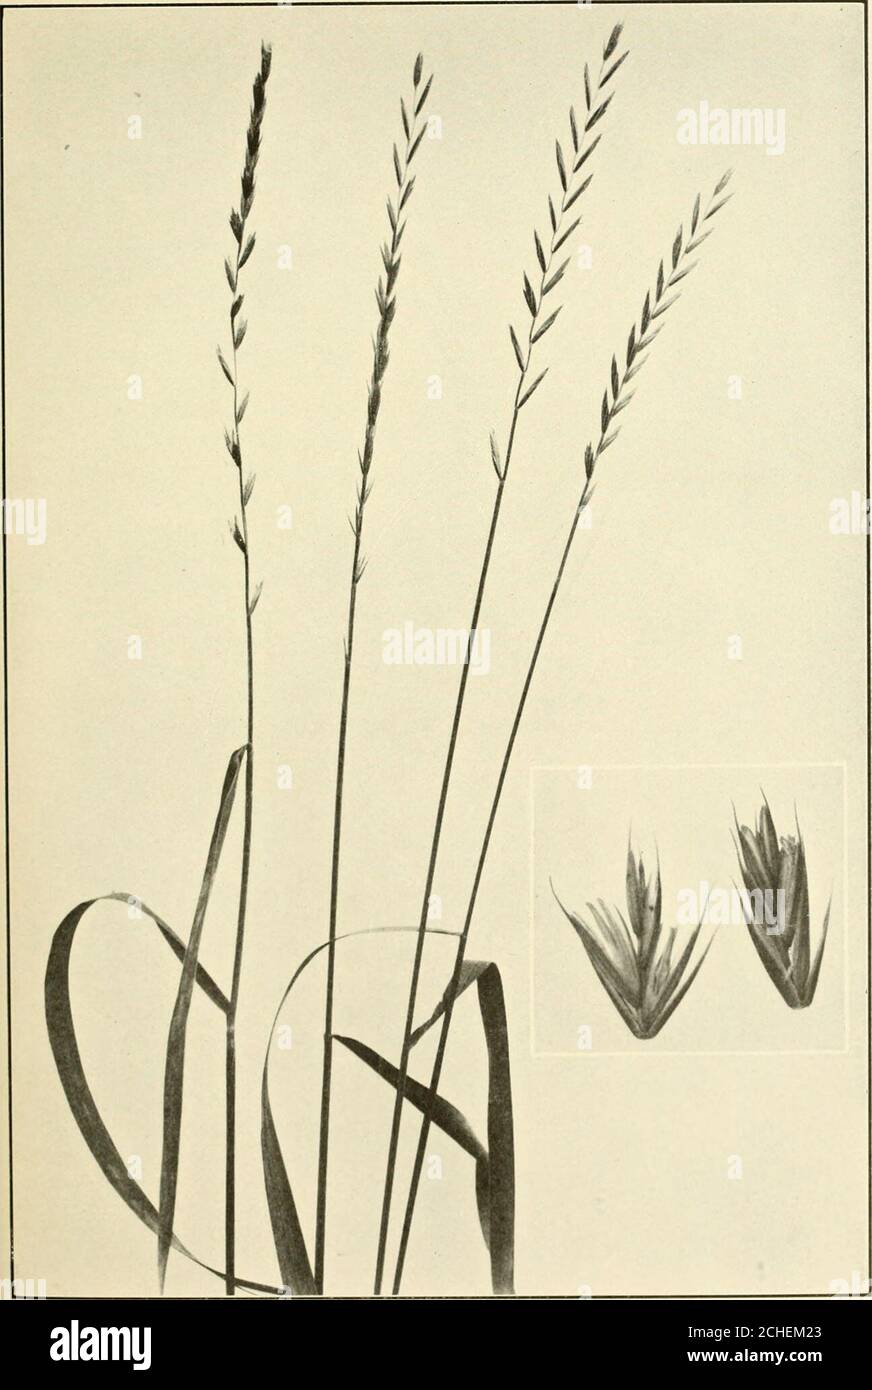 . The book of grasses : an illustrated guide to the common grasses, and the most common of the rushes and sedges . &lt; i,K.SS (Lolium pcrcini I Naiural size. Spikclcls enlarged by two. COUCH-GRASS (.t i:n)t&gt;vn&gt;n )cpens). One h.ilf natural size. Spikelcls enlarged by two Illustrated Descriptions of the Grasses f or with their backs to the stem, while in Couch-grass the spikeletsare closely placed with their sides against the axis of the spike.Couch-grass grows with the energy of the ^ .^ ^ j, fabled hydra. .^^^ ^^^ MT, and where one of the dark green stems is cut, halfa dozen rise to Stock Photo